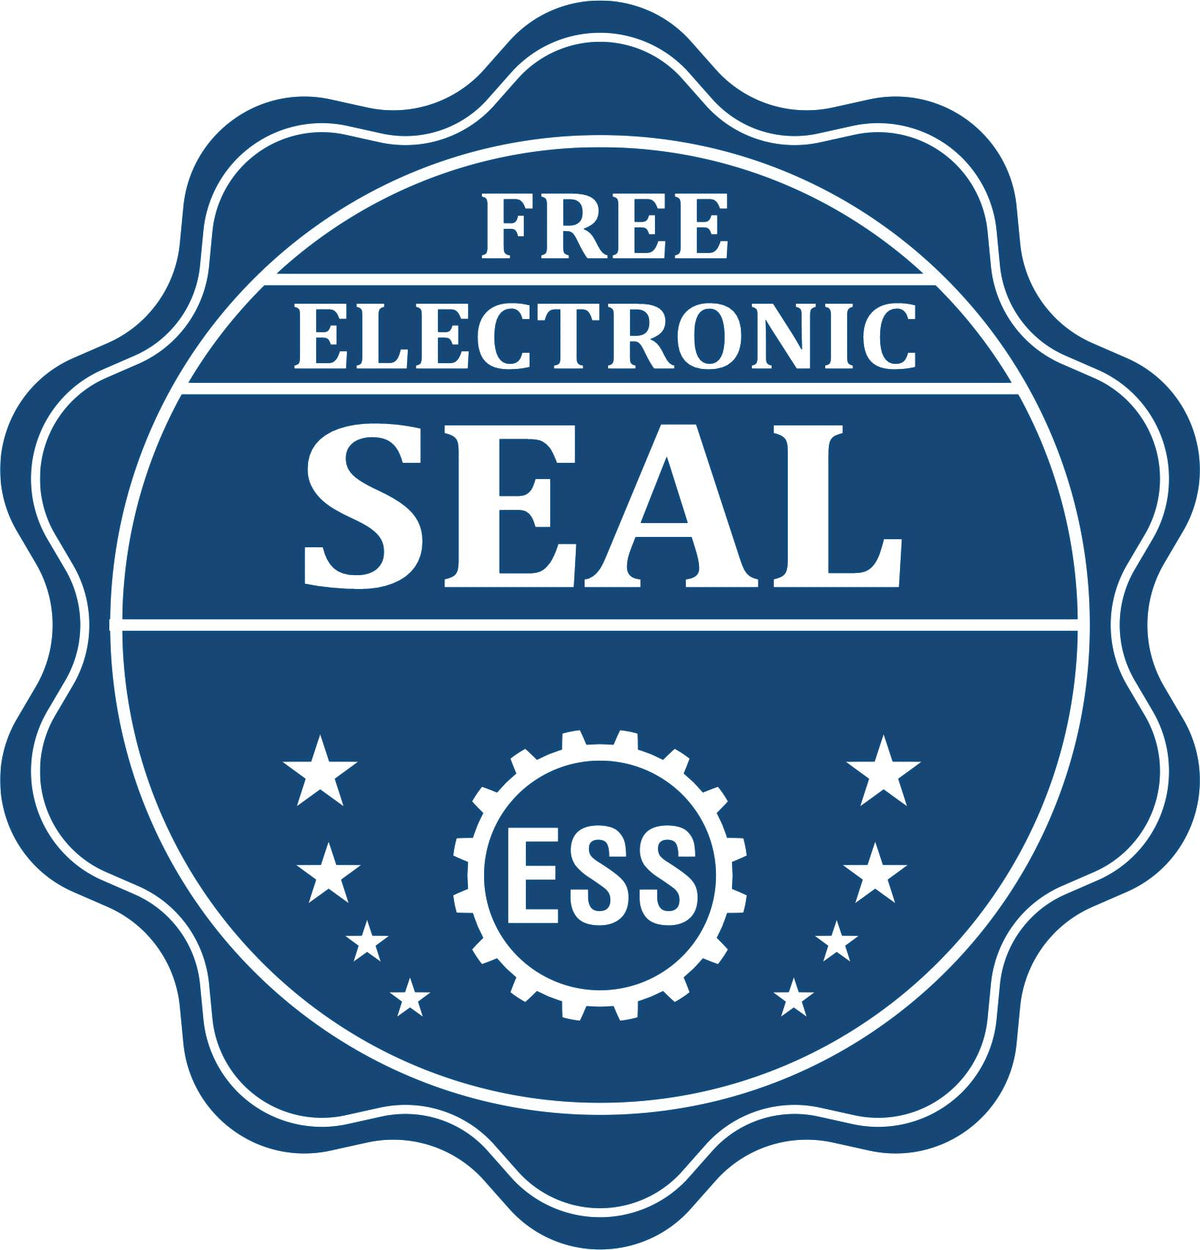 A badge showing a free electronic seal for the Self-Inking Kentucky Landscape Architect Stamp with stars and the ESS gear on the emblem.